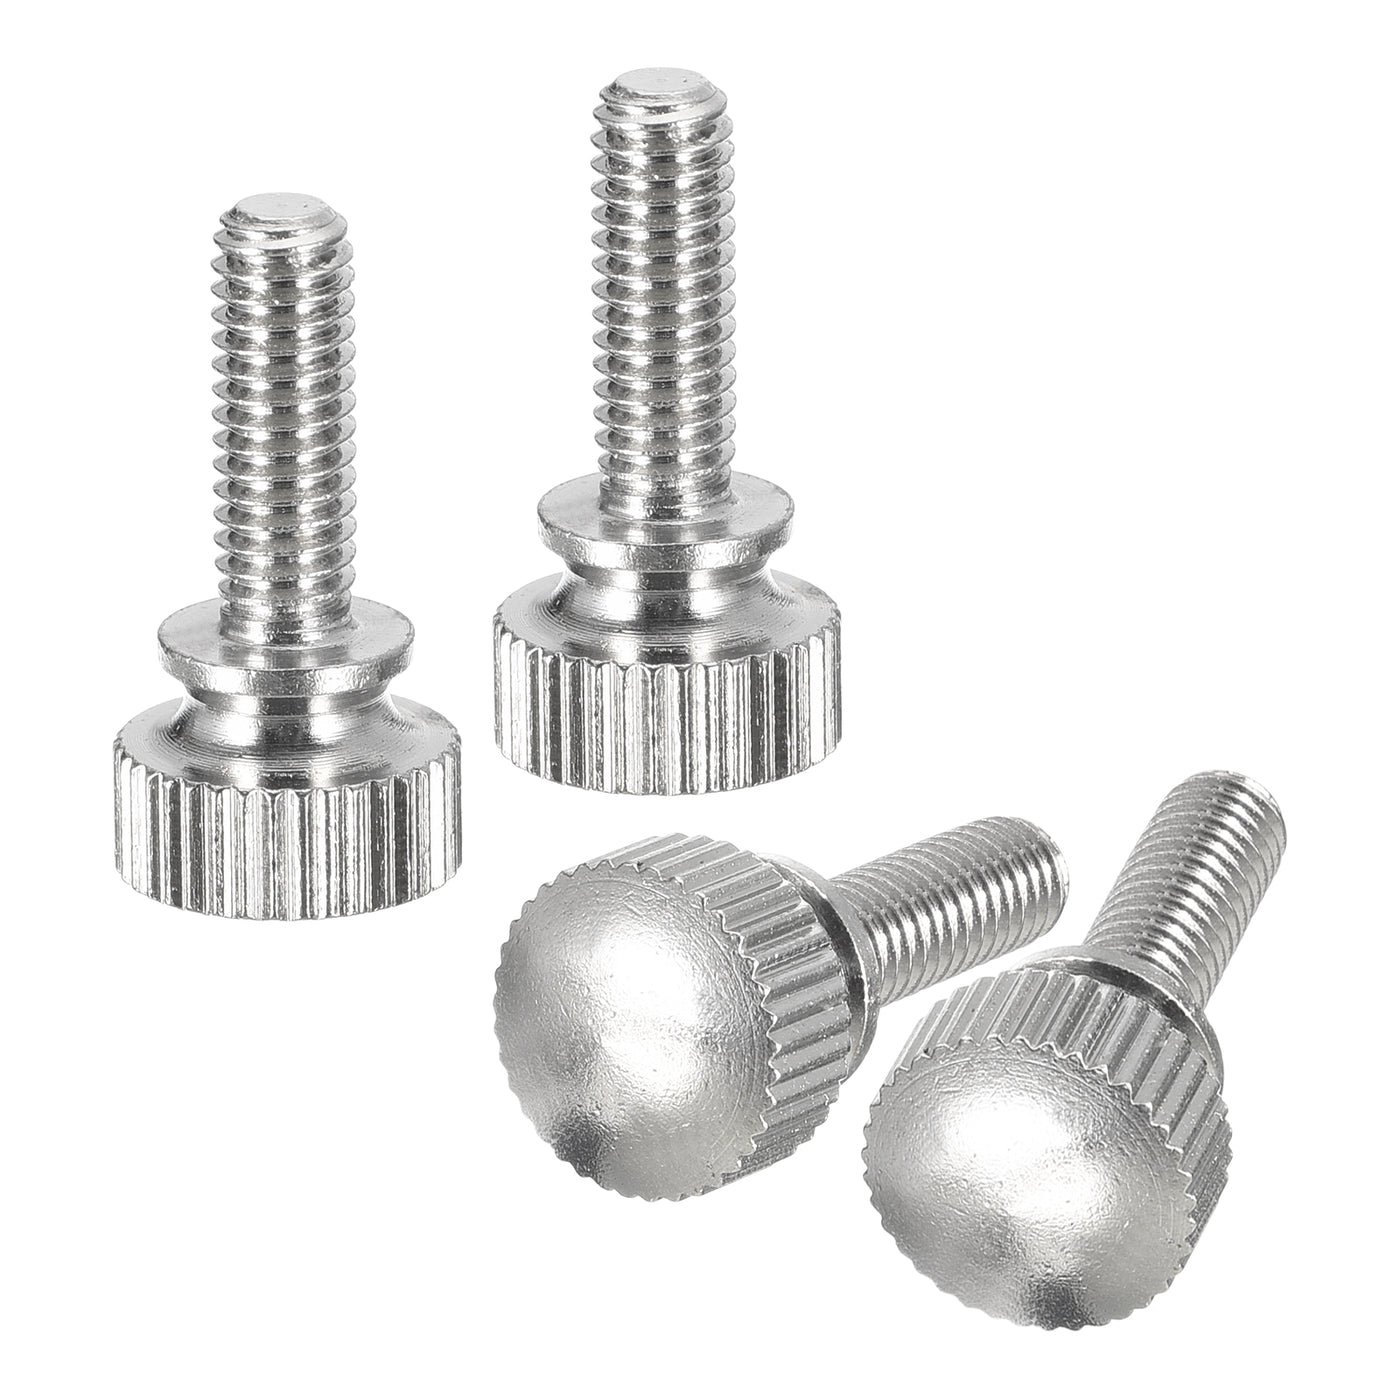 uxcell Uxcell M4x12mm Knurled Thumb Screws, 4pcs Brass Thumb Screws with Shoulder, Silver Tone